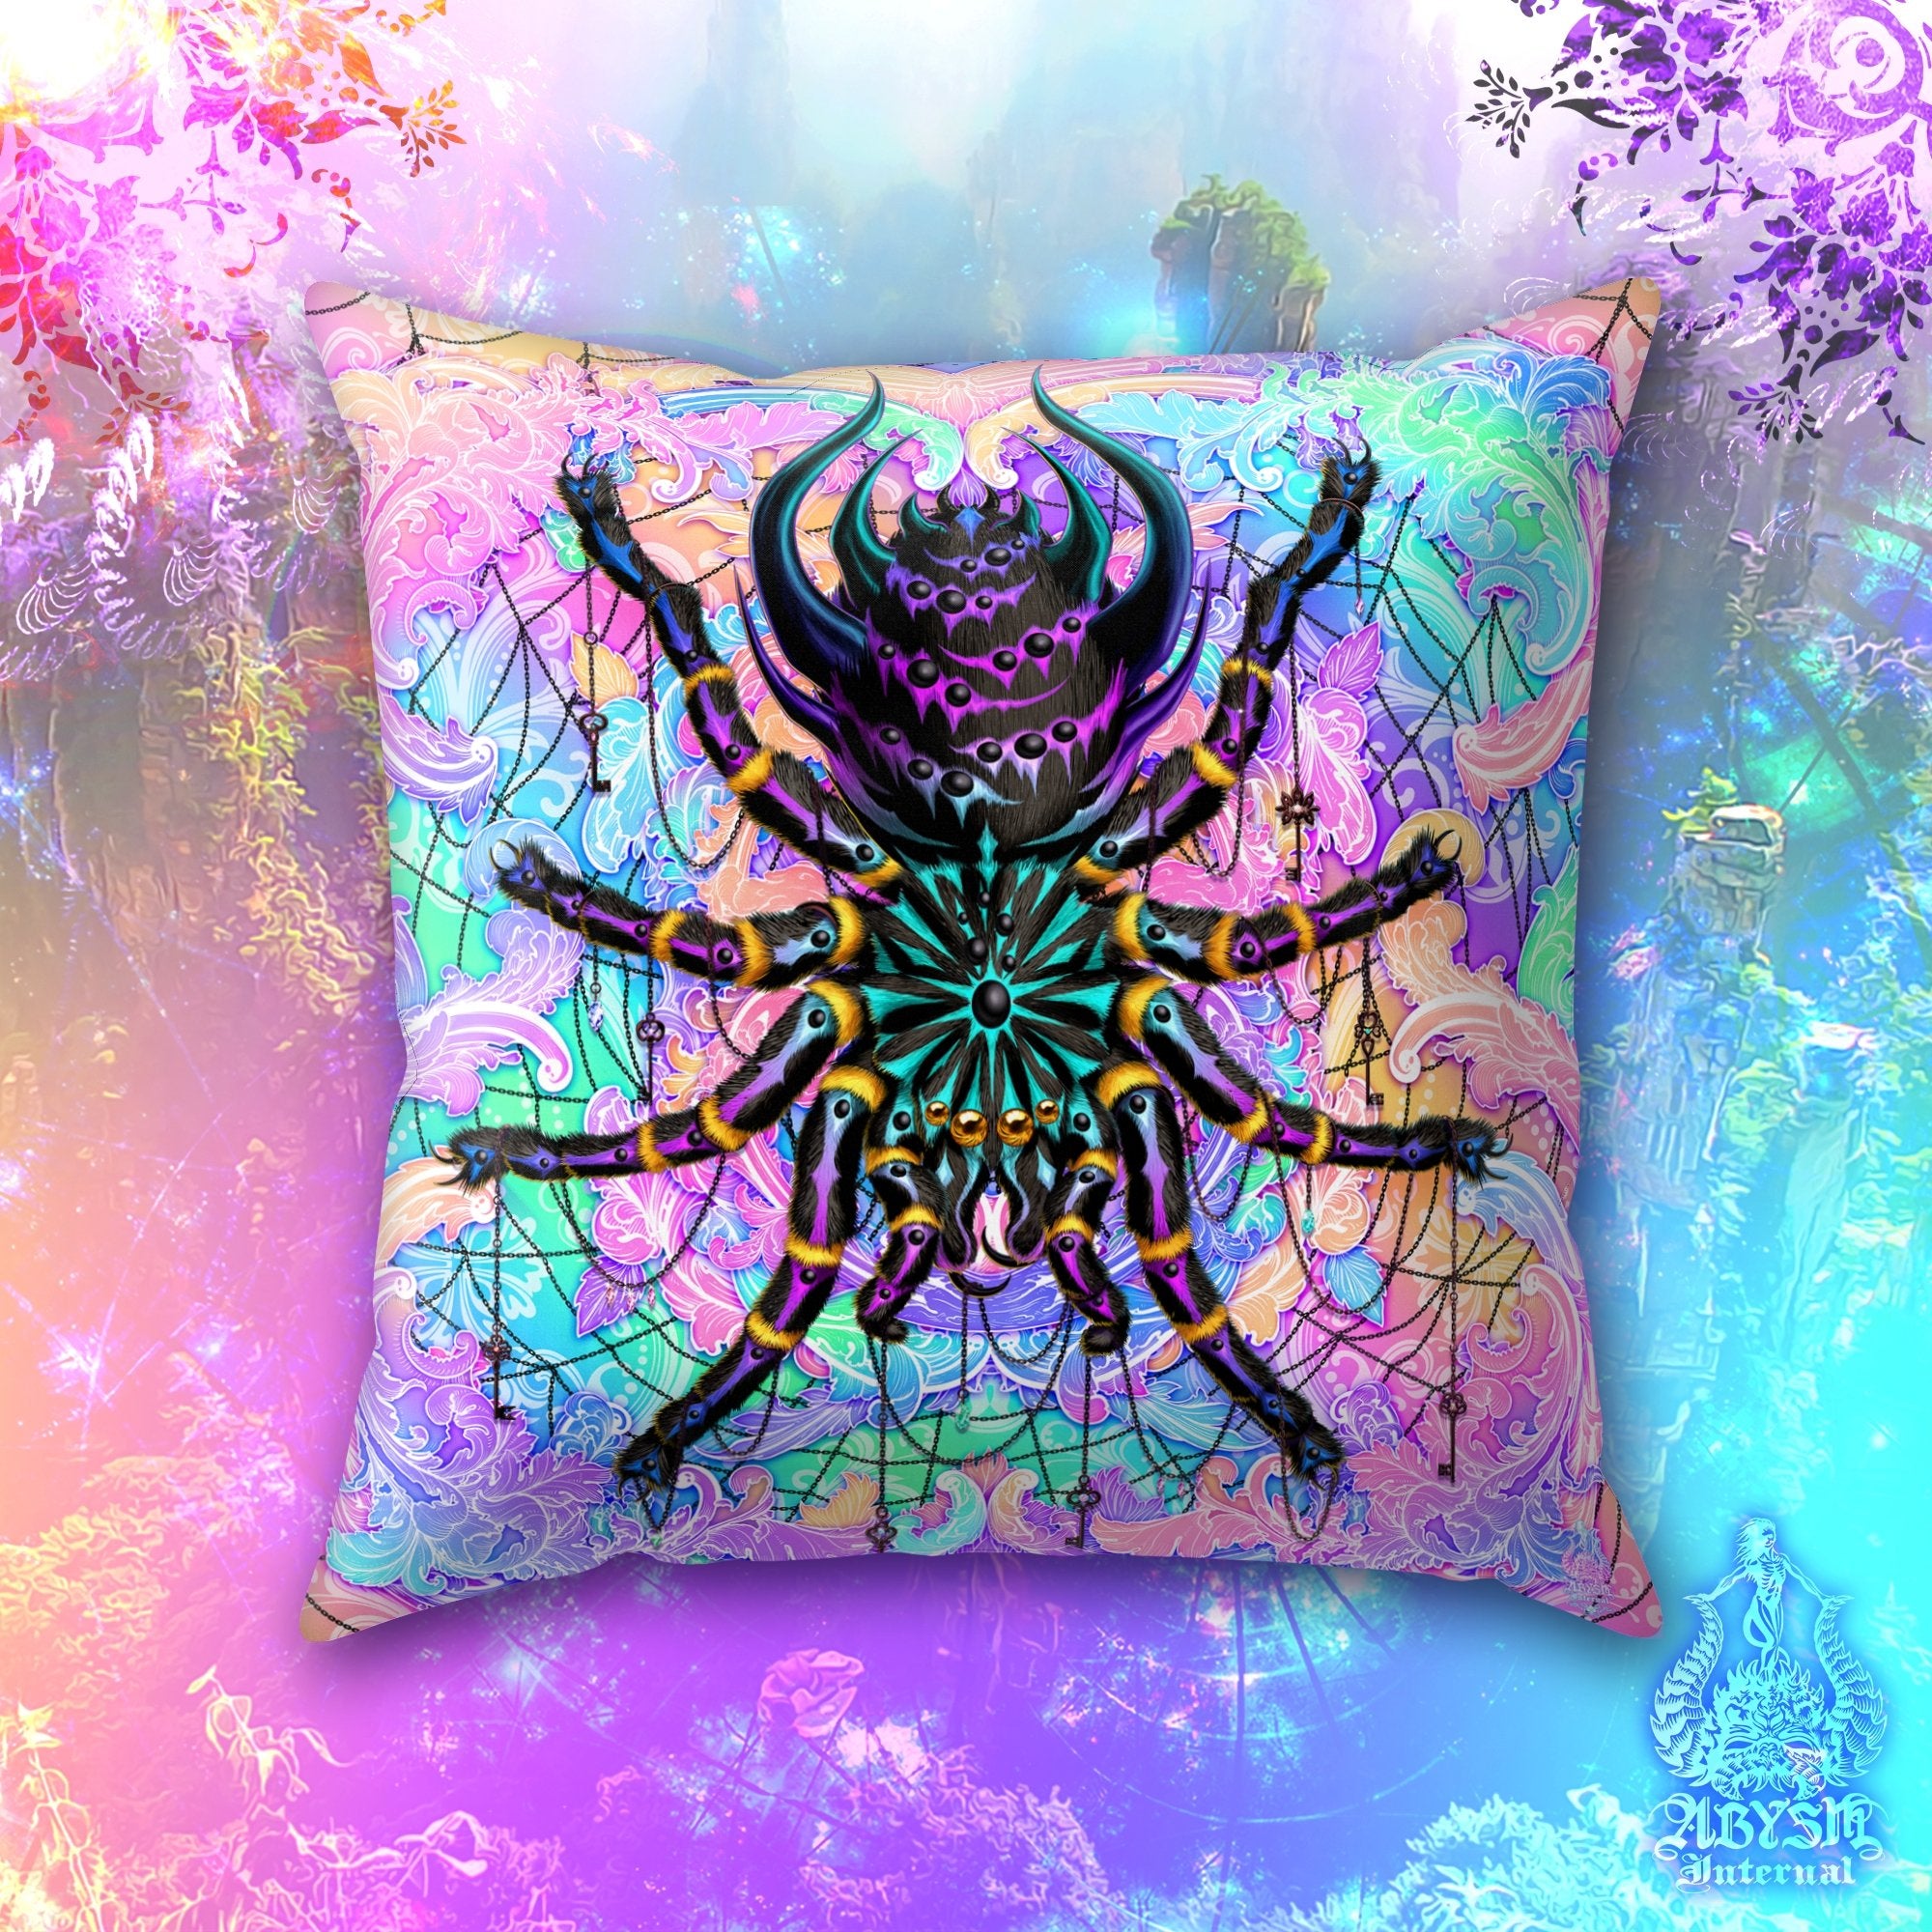 Psychedelic Throw Pillow, Decorative Accent Cushion, Holographic Pastel Punk Room Decor, Funky and Eclectic Home - Tarantula, Aesthetic Art, Black Spider - Abysm Internal